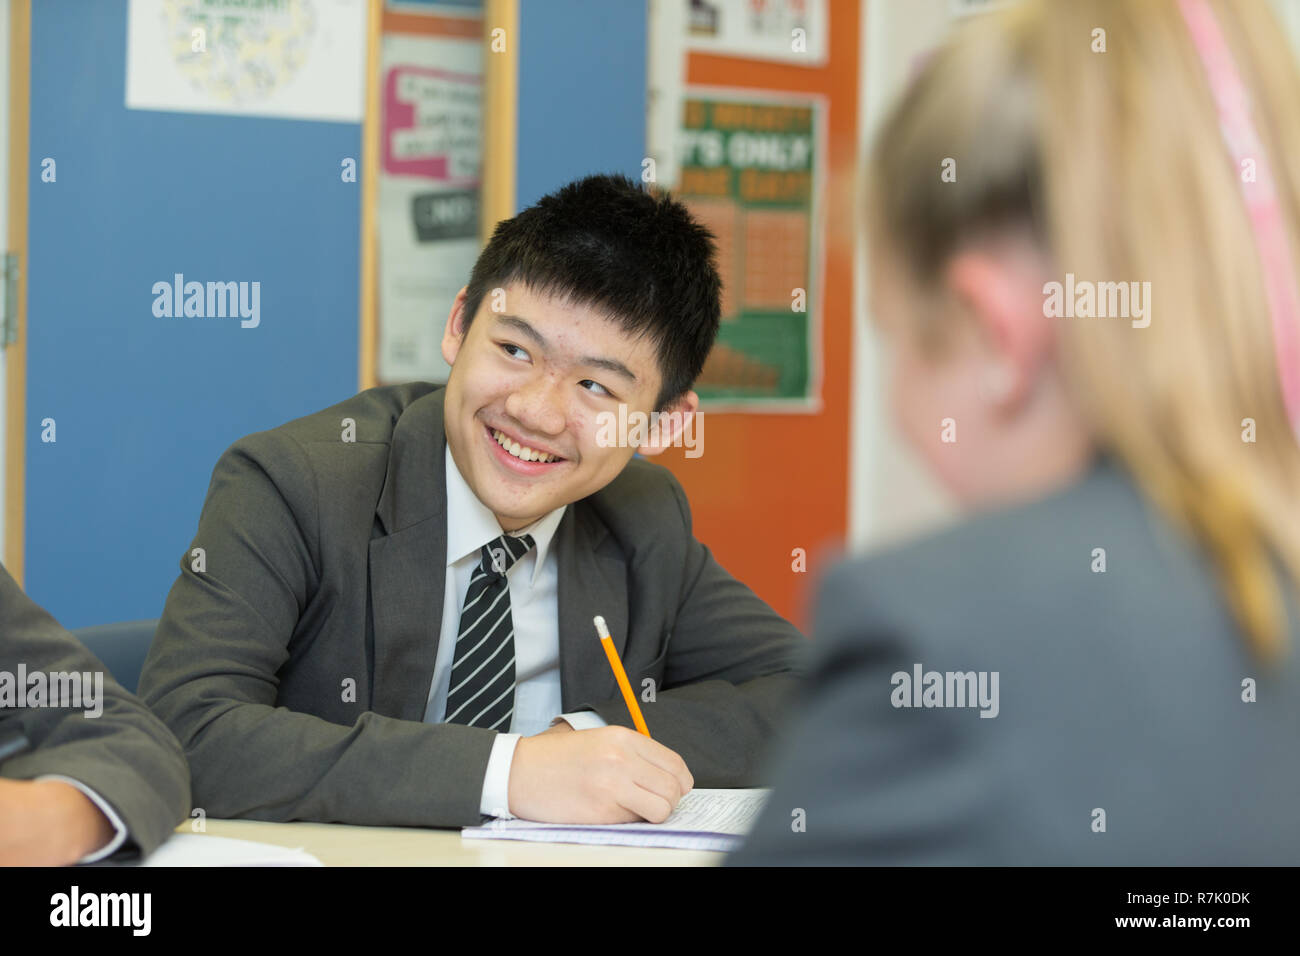 14 year old pupil in a classroom, eastern Asian ethnicity, UK Stock Photo